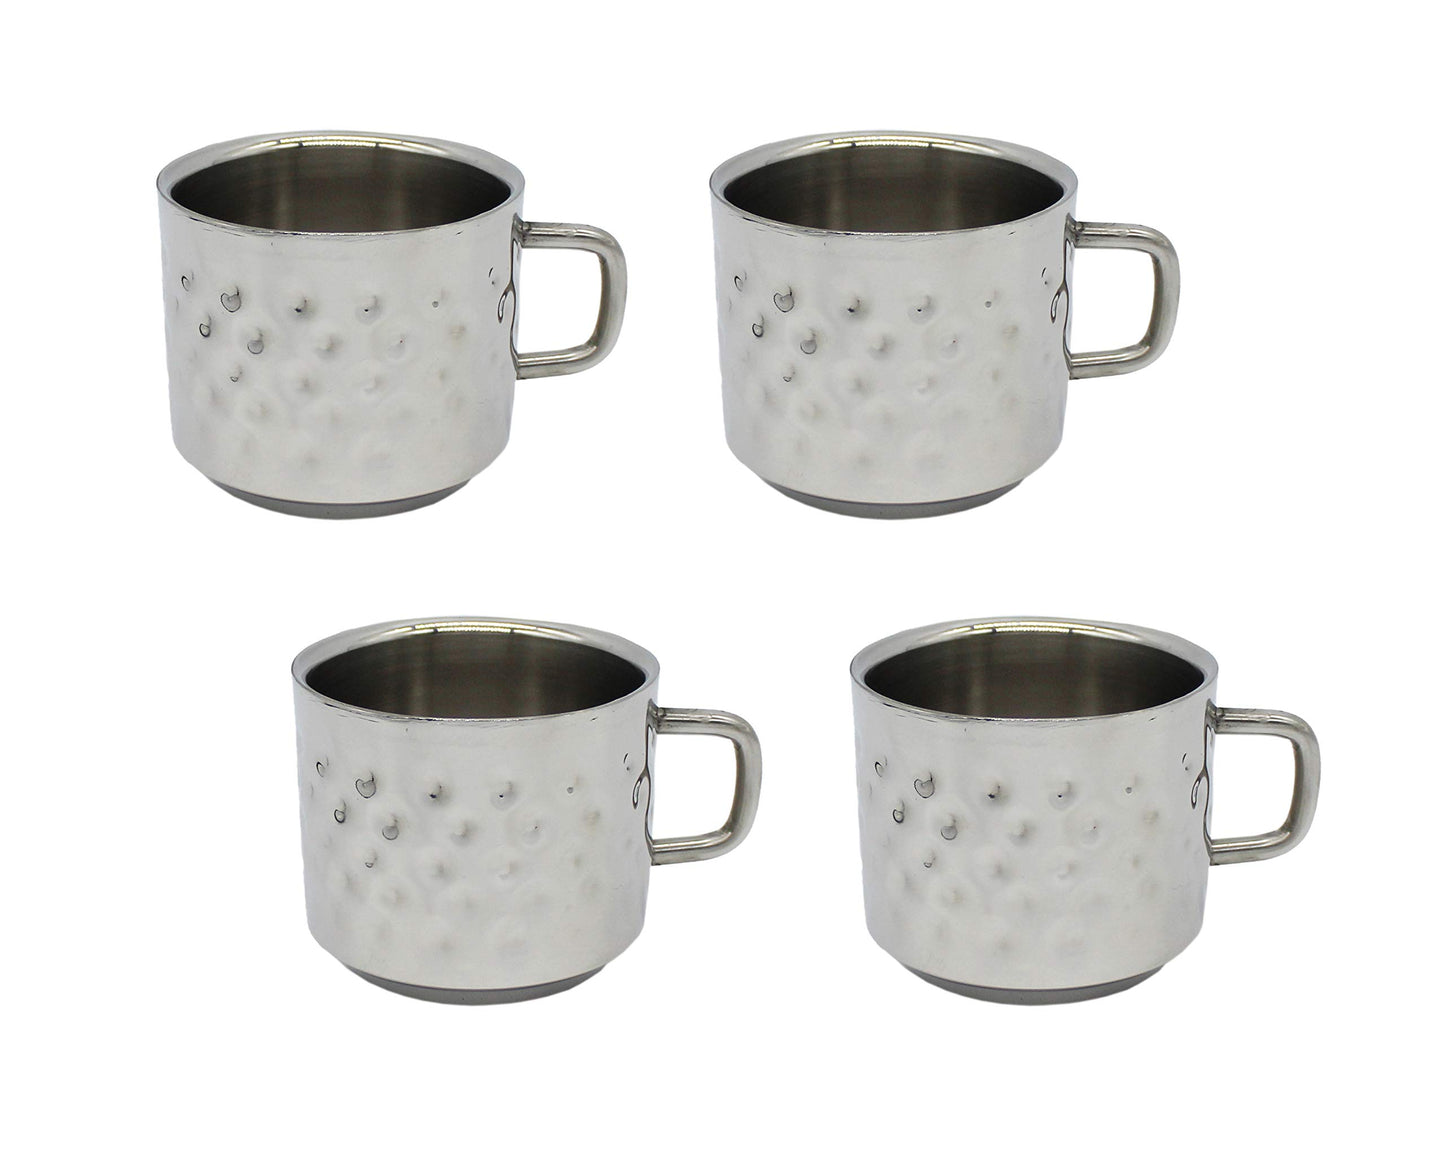 Double Walled Dimple Design Stainless Steel Coffee & Tea Mugs